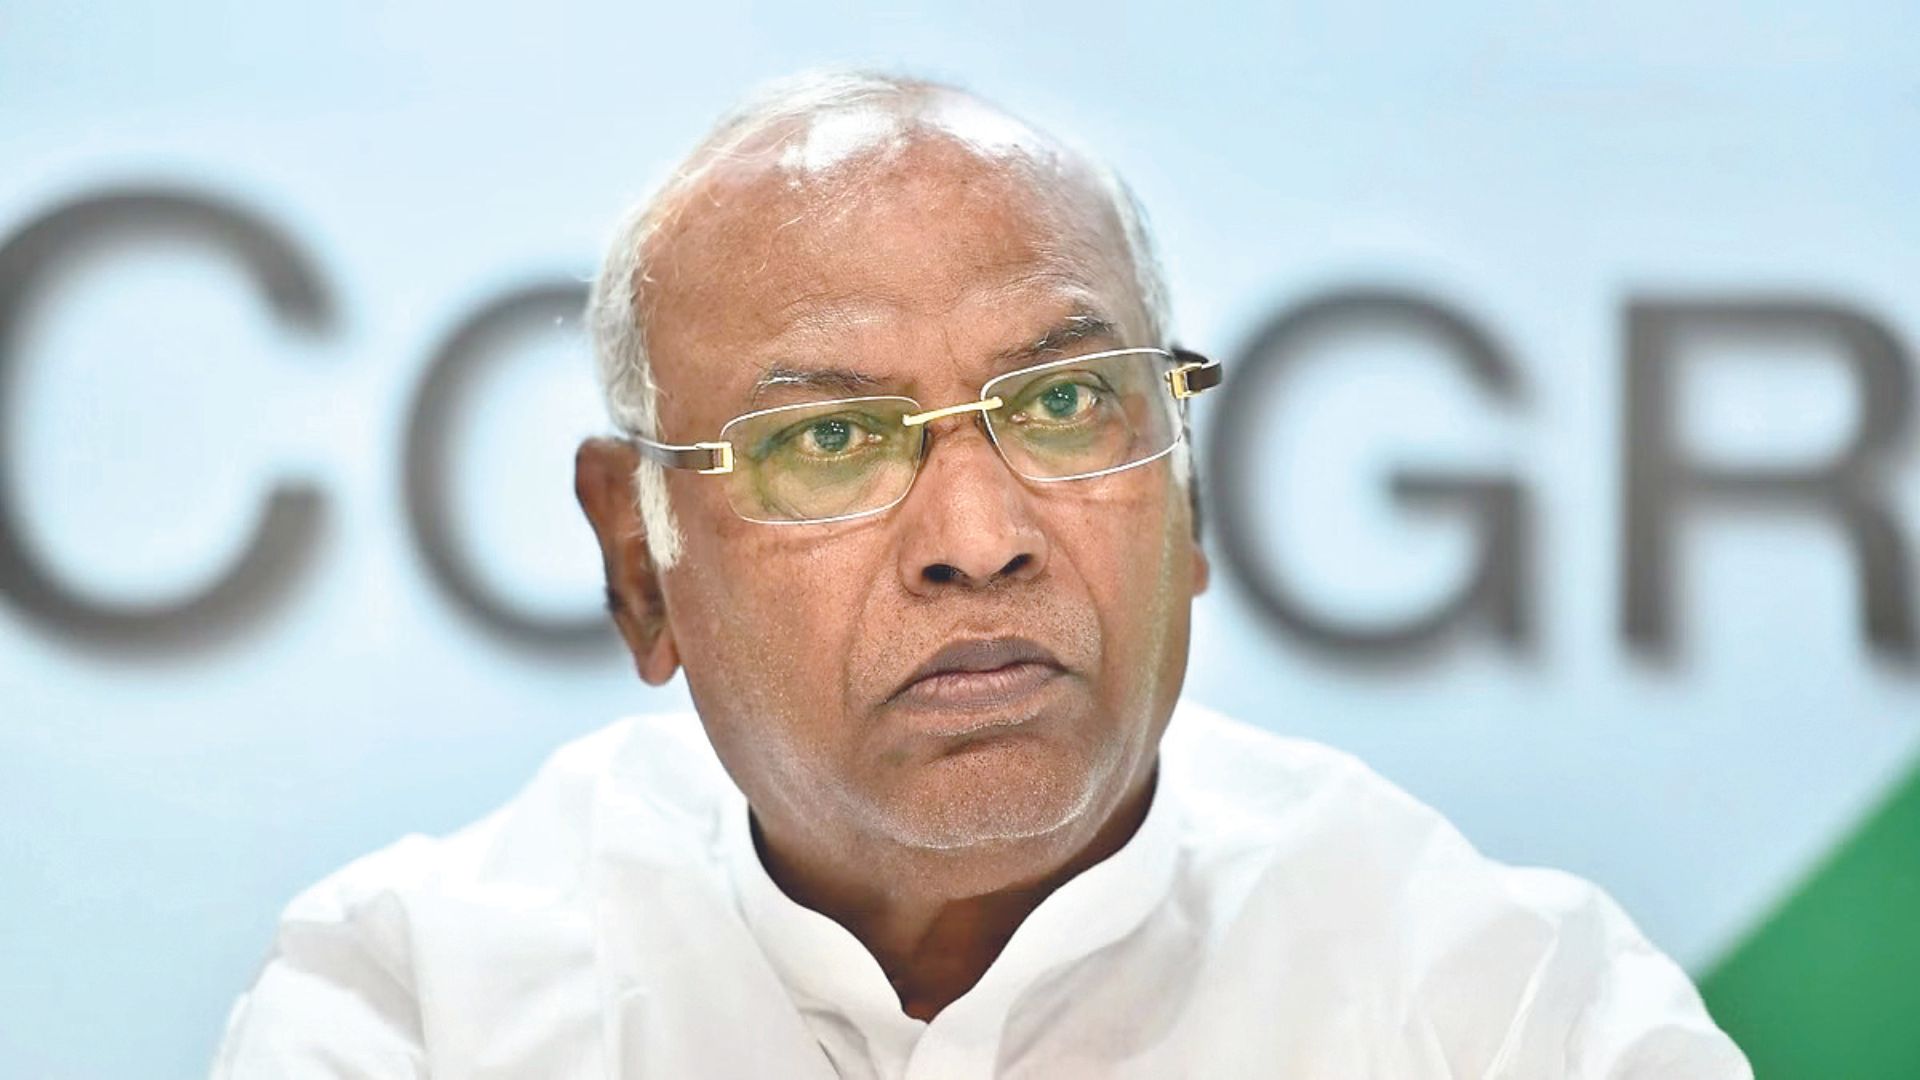 BJP will change constitution, take away Fundamental Rights: Kharge